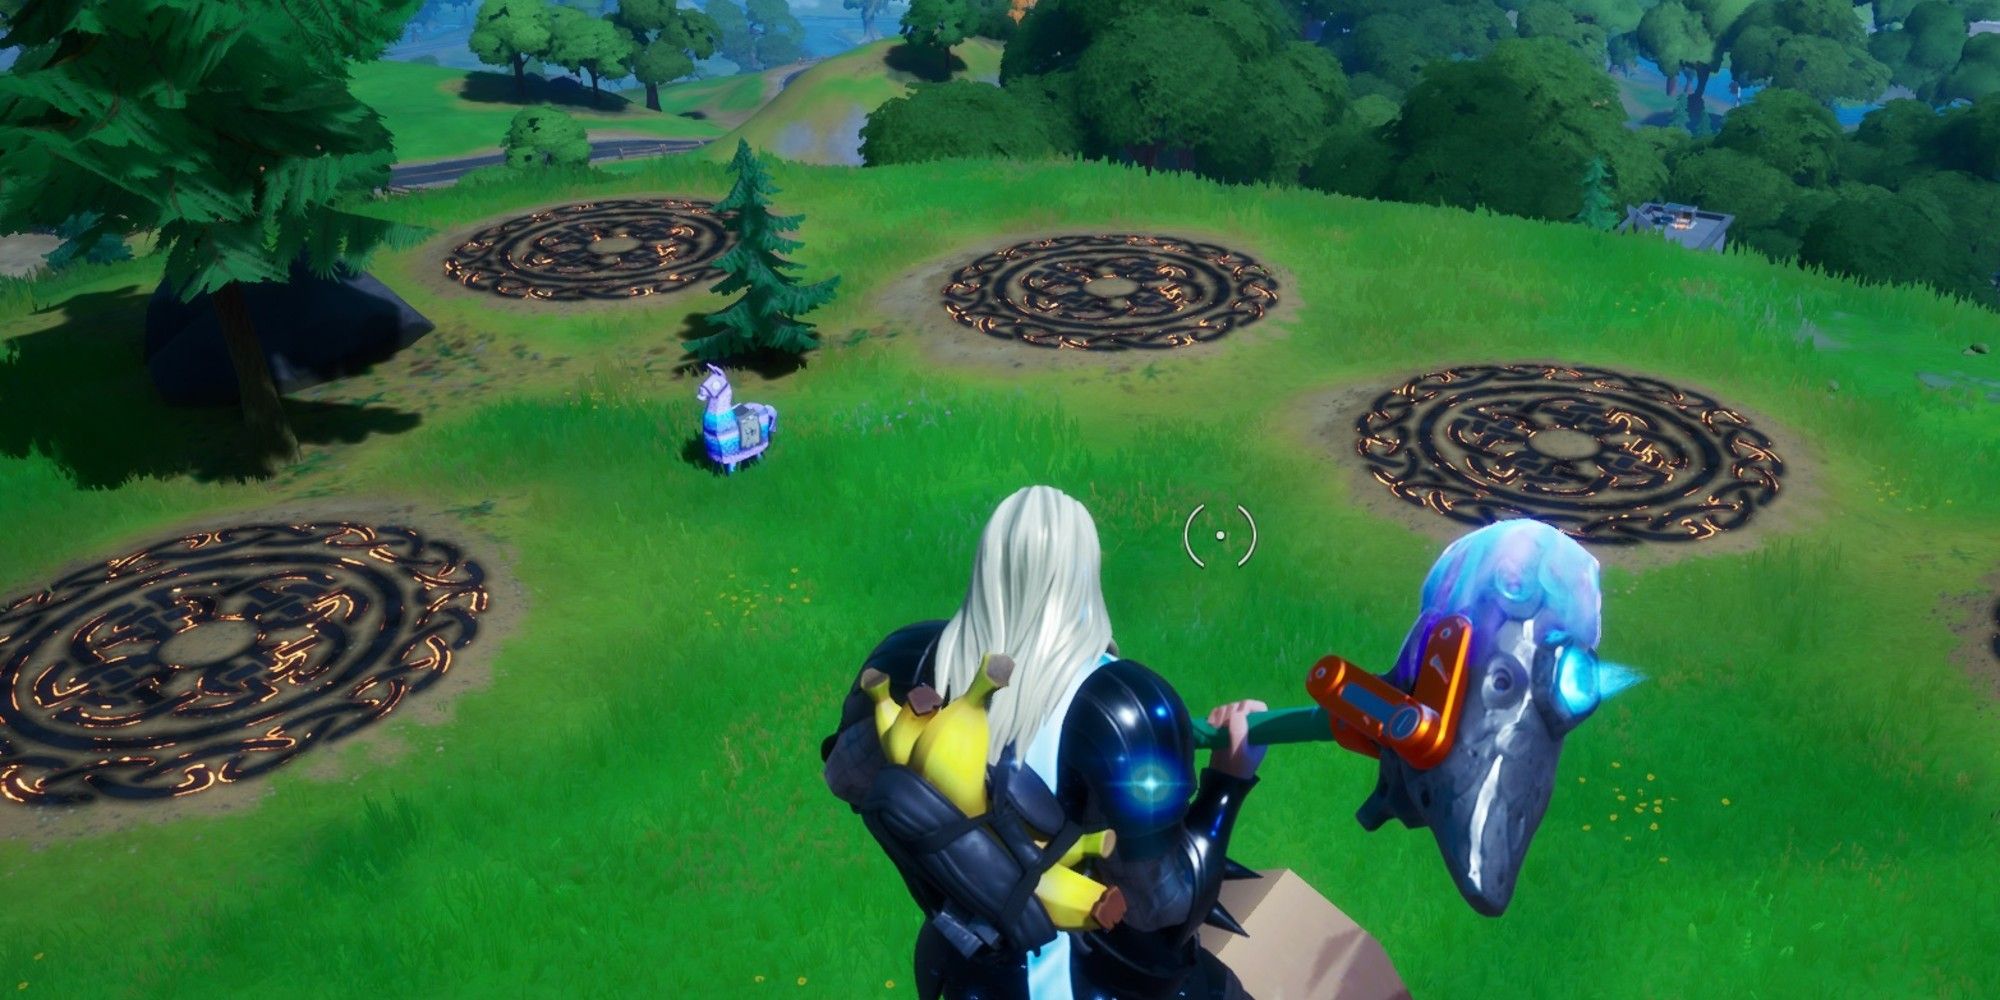 All the Bifrost Rune Markings are located close together in Fortnite Season 4 Thor Awakening challenge